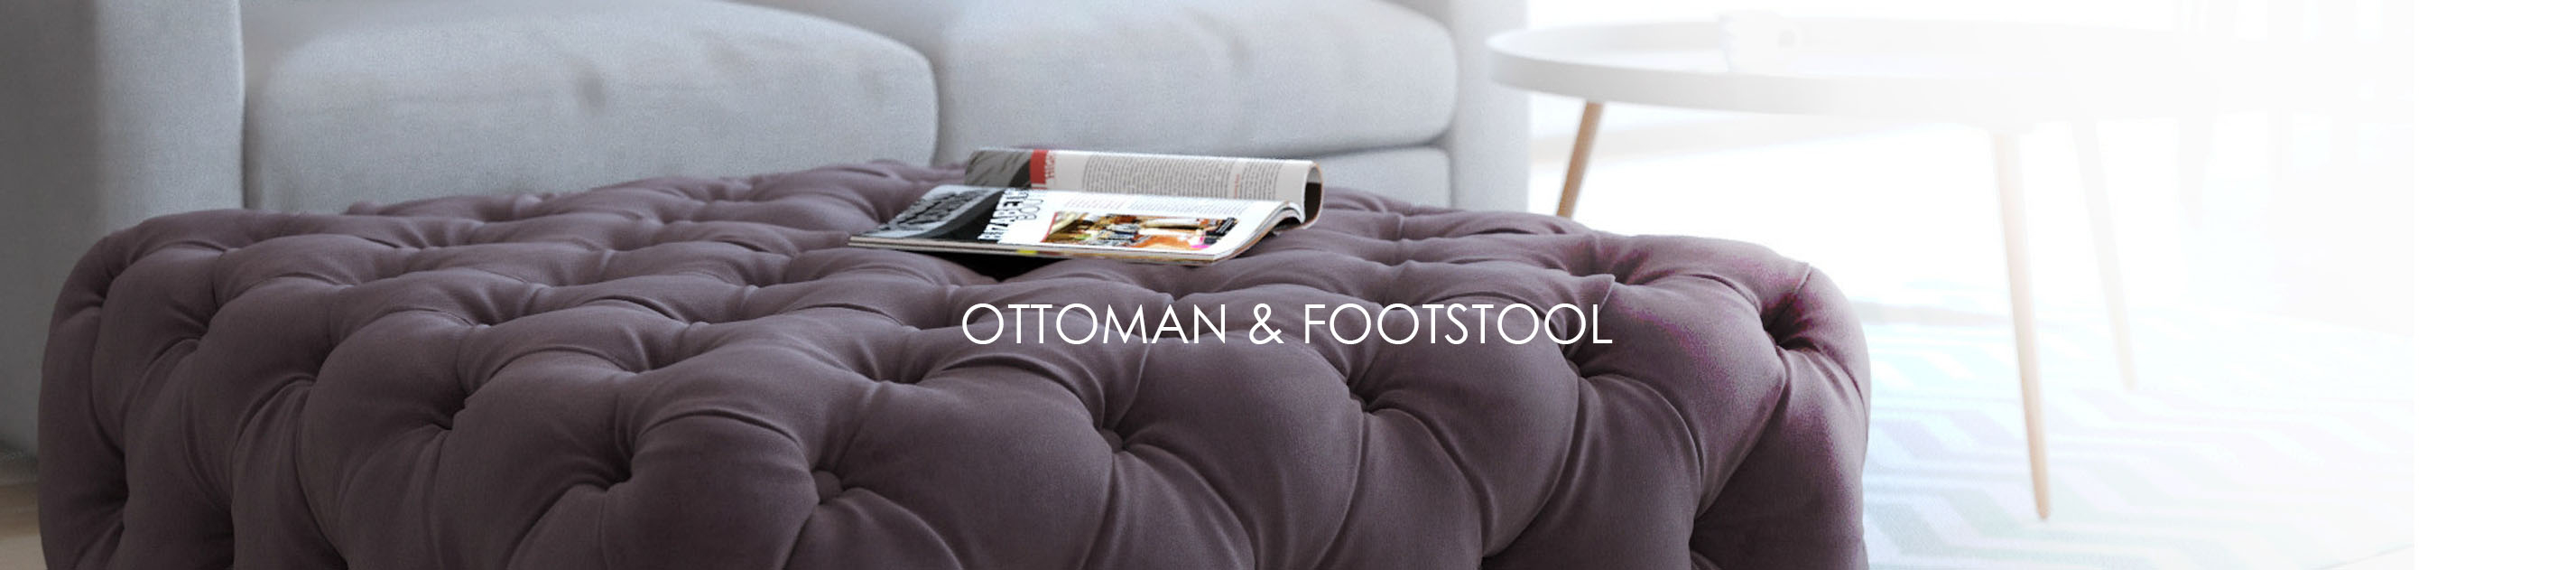 Ottomans and Footstools